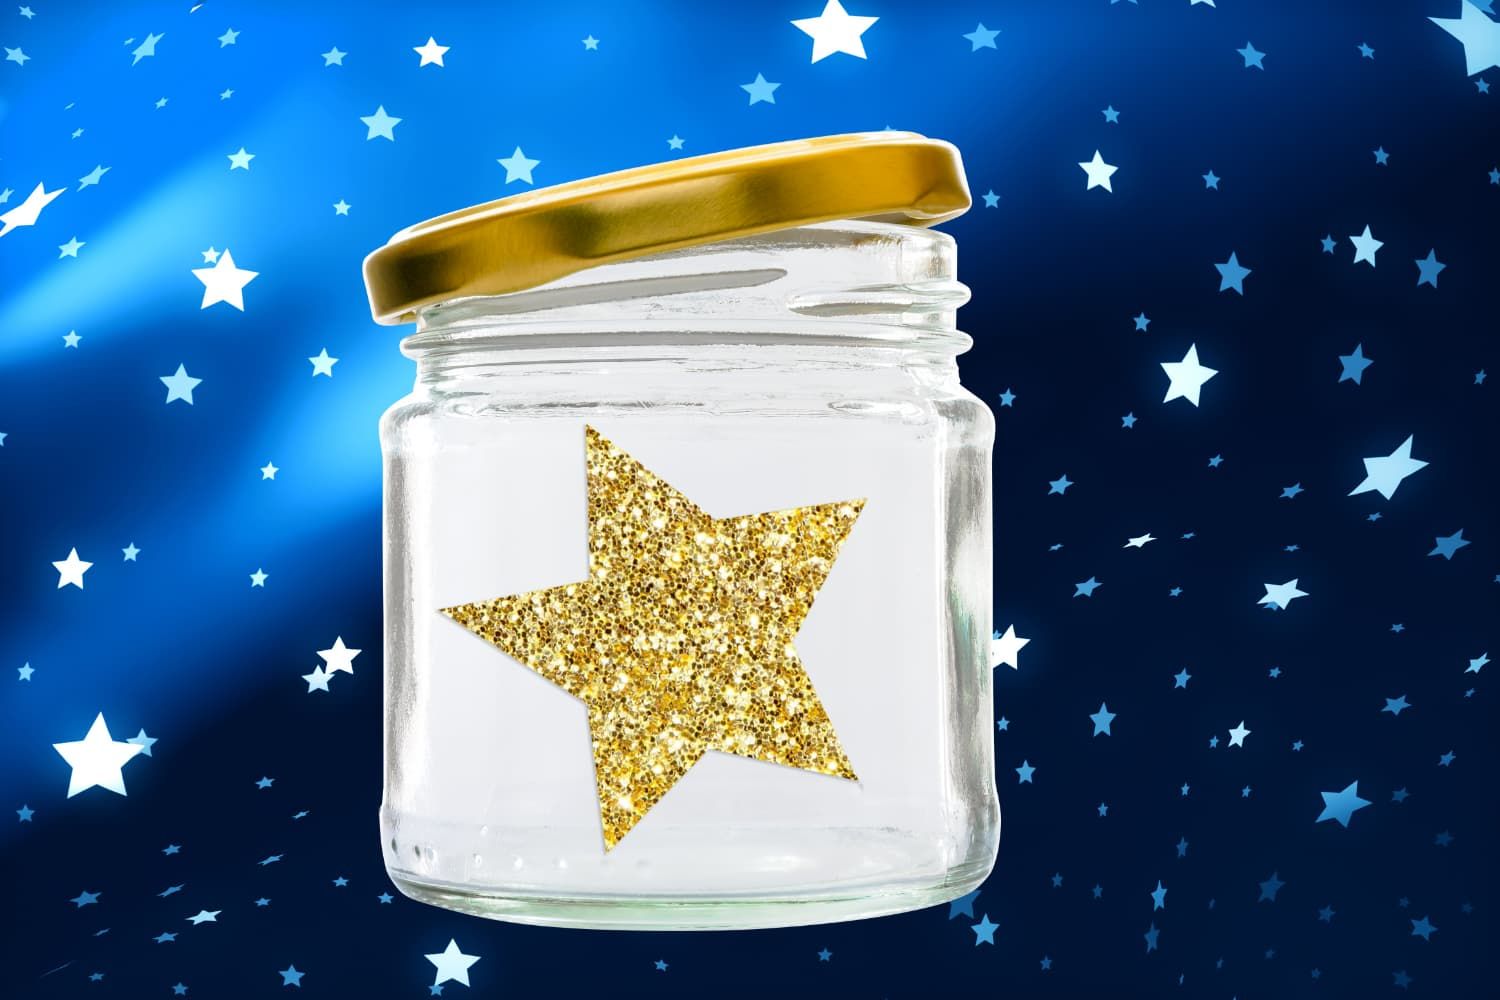 Object%20lesson%20-%20Stars%20in%20a%20jar-6132cbc5 Patience / impatience